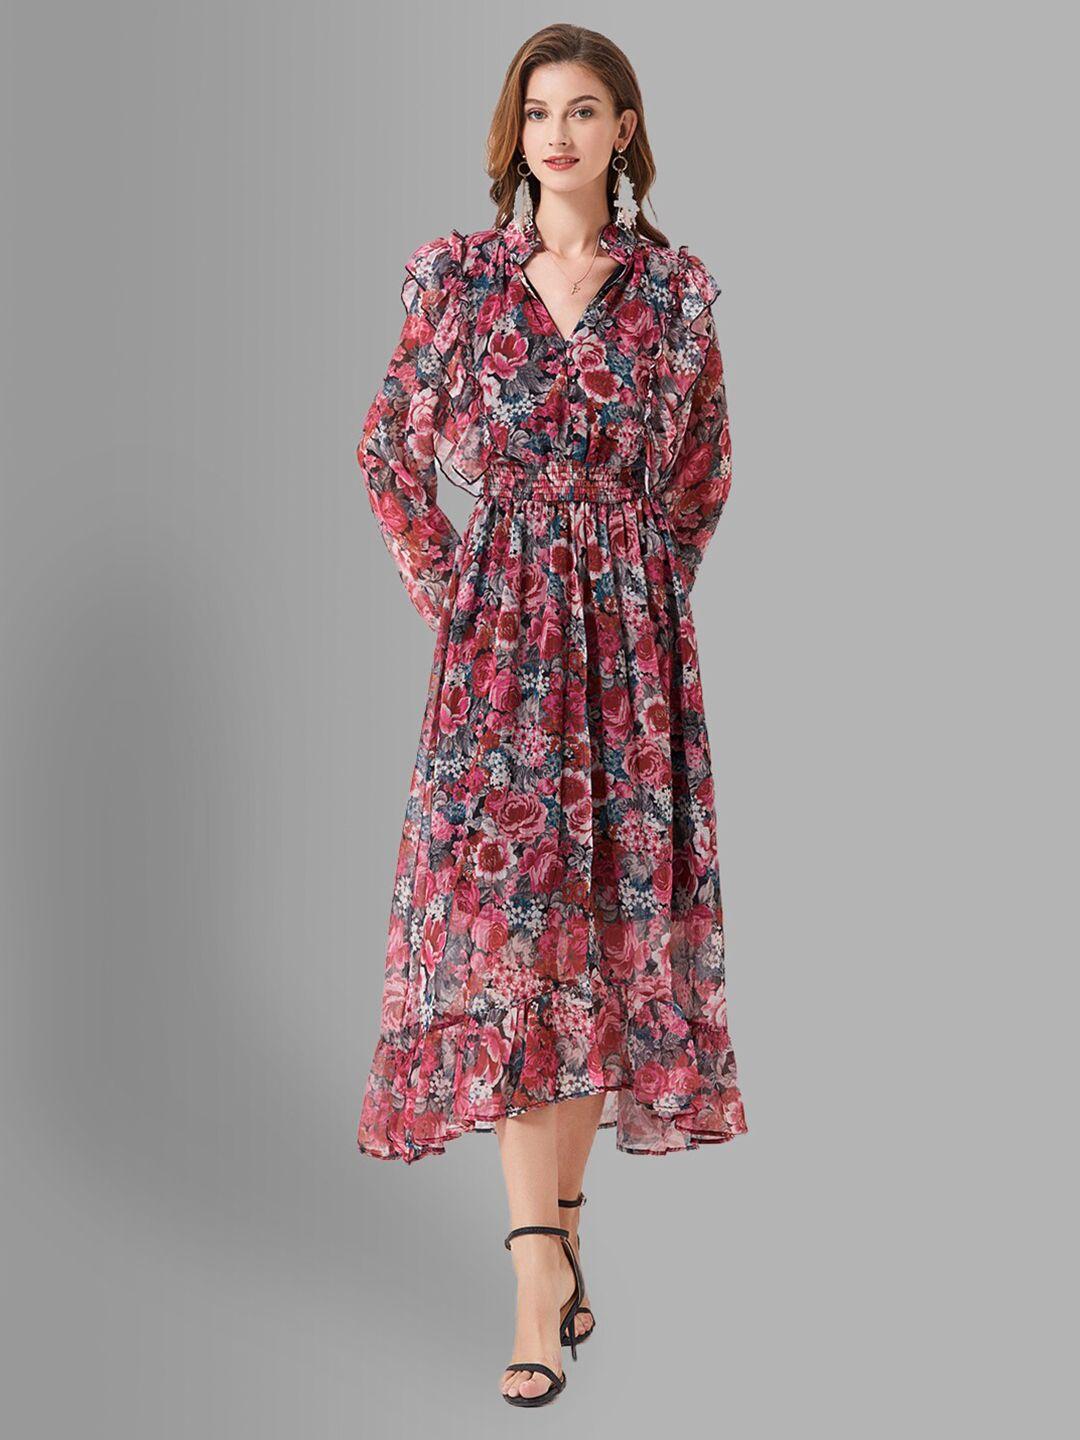 jc-collection-red-floral-maxi-dress